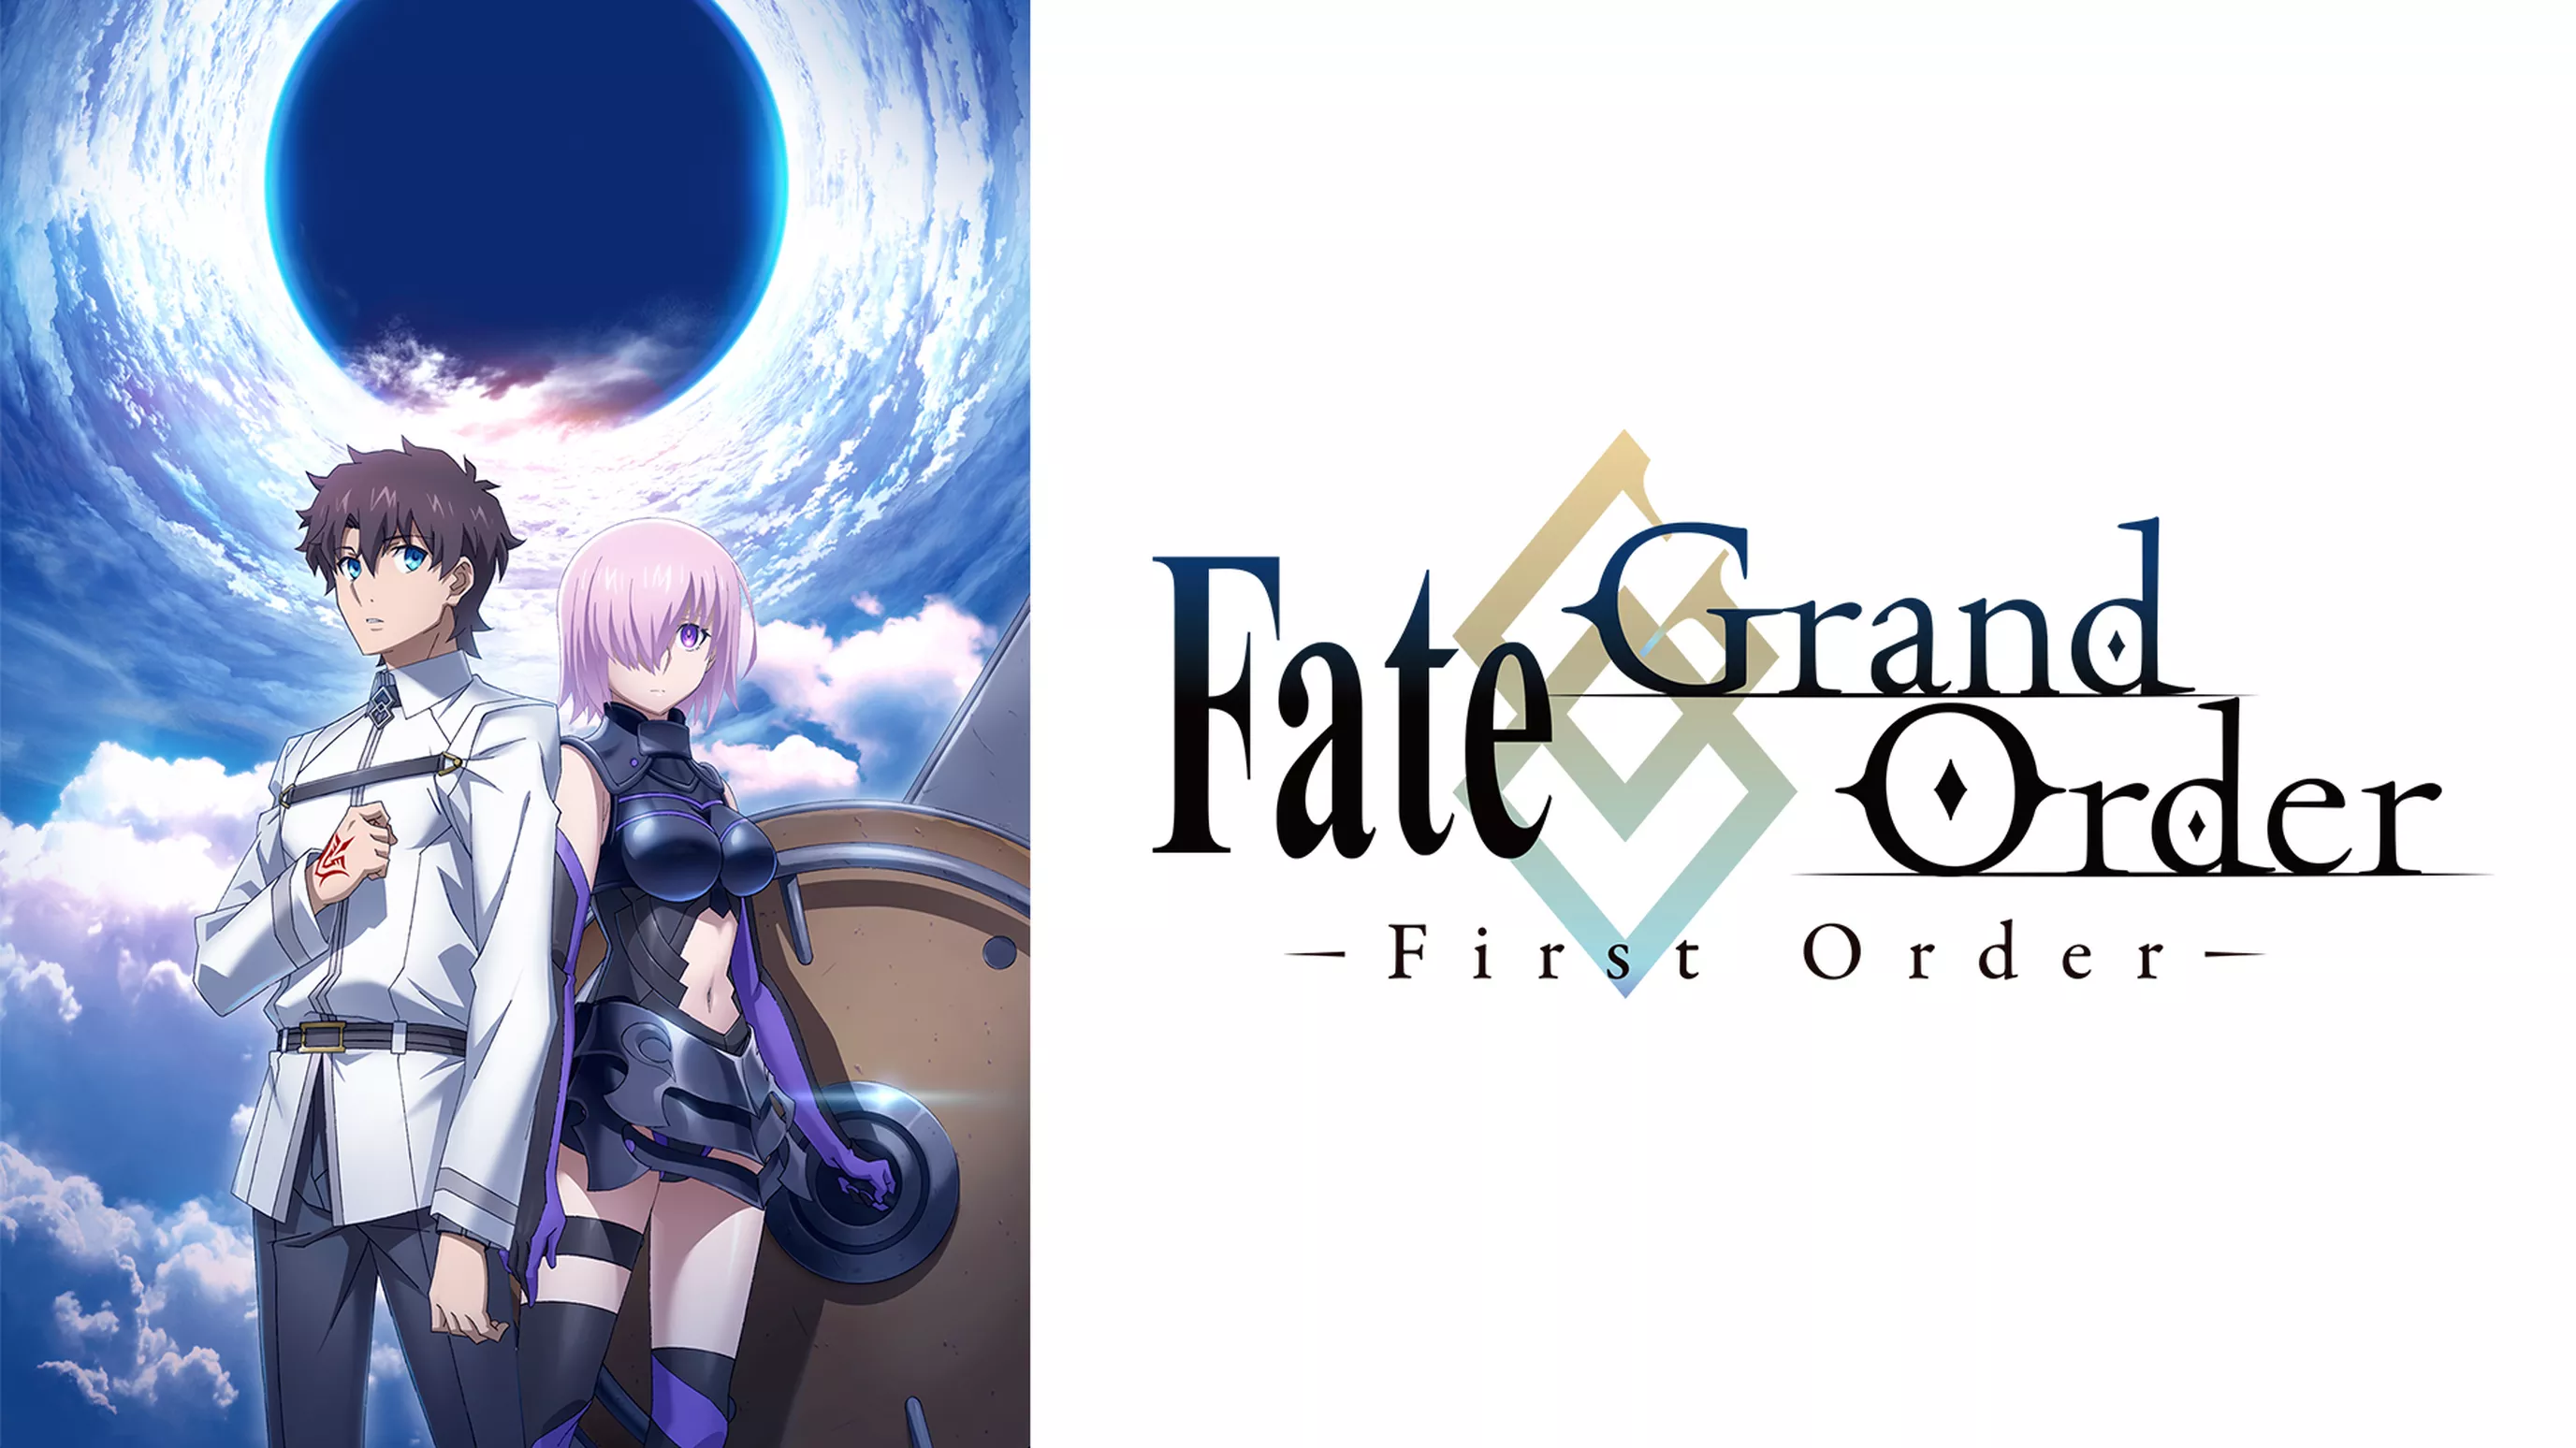 Fate/Grand Order -First Order-(アニメ / 2016)の動画視聴 | U-NEXT